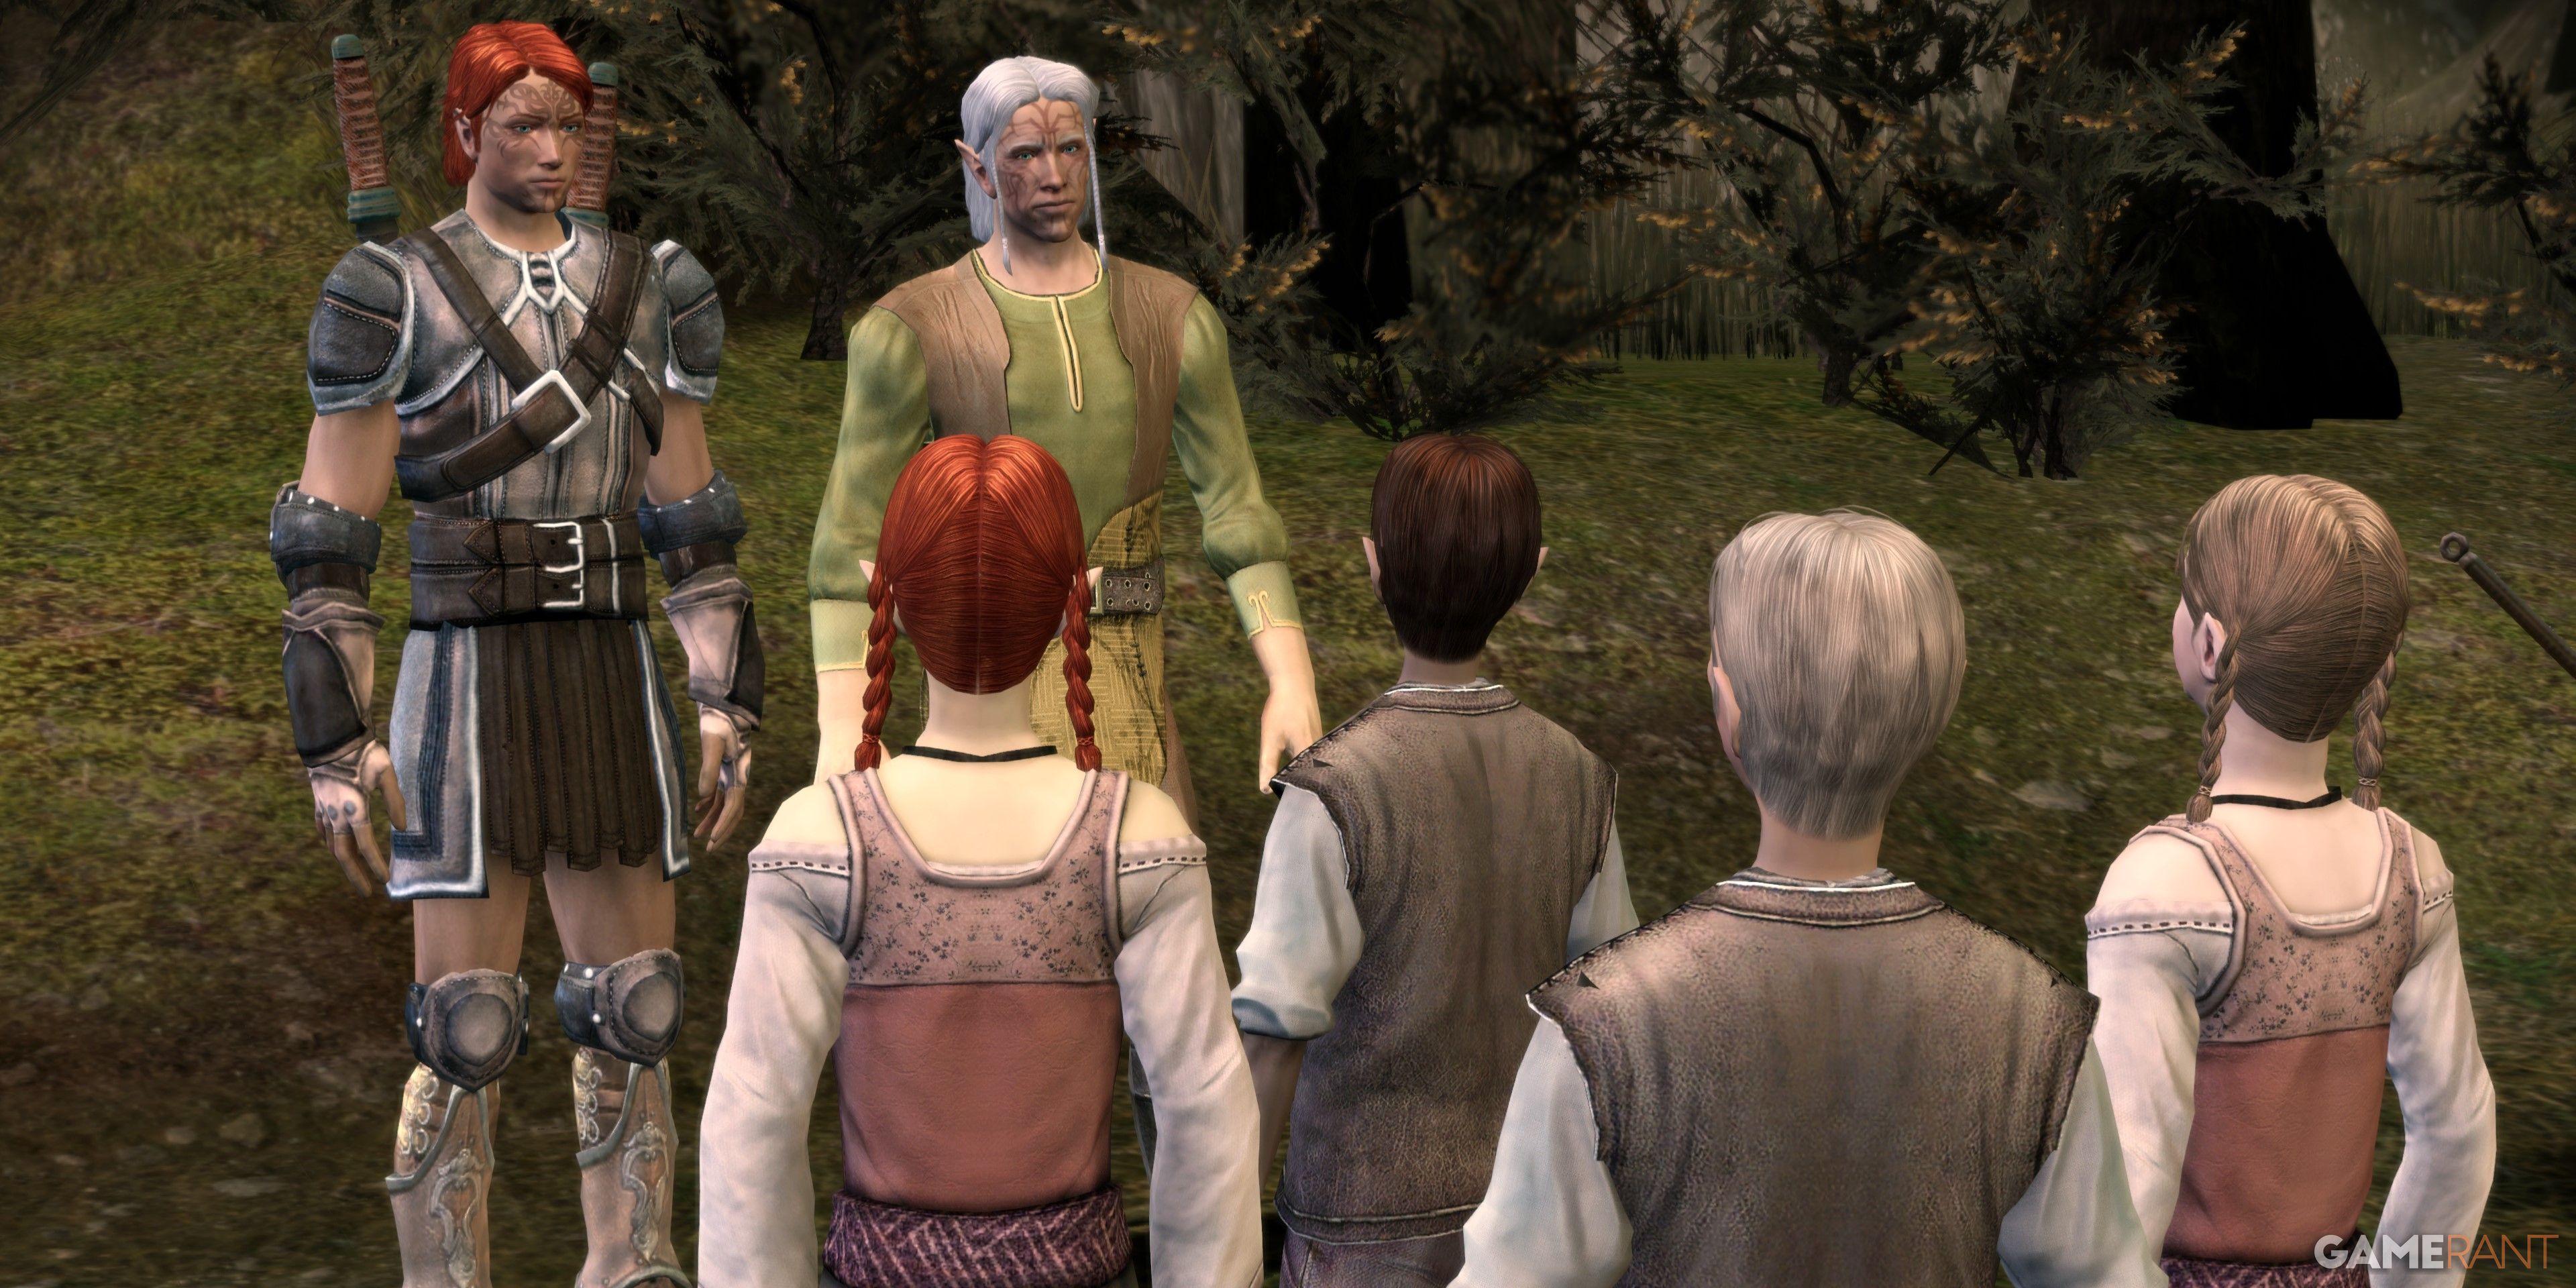 Mahariel and Paivel tell the children about Dalish history in the Dalish Elf origin